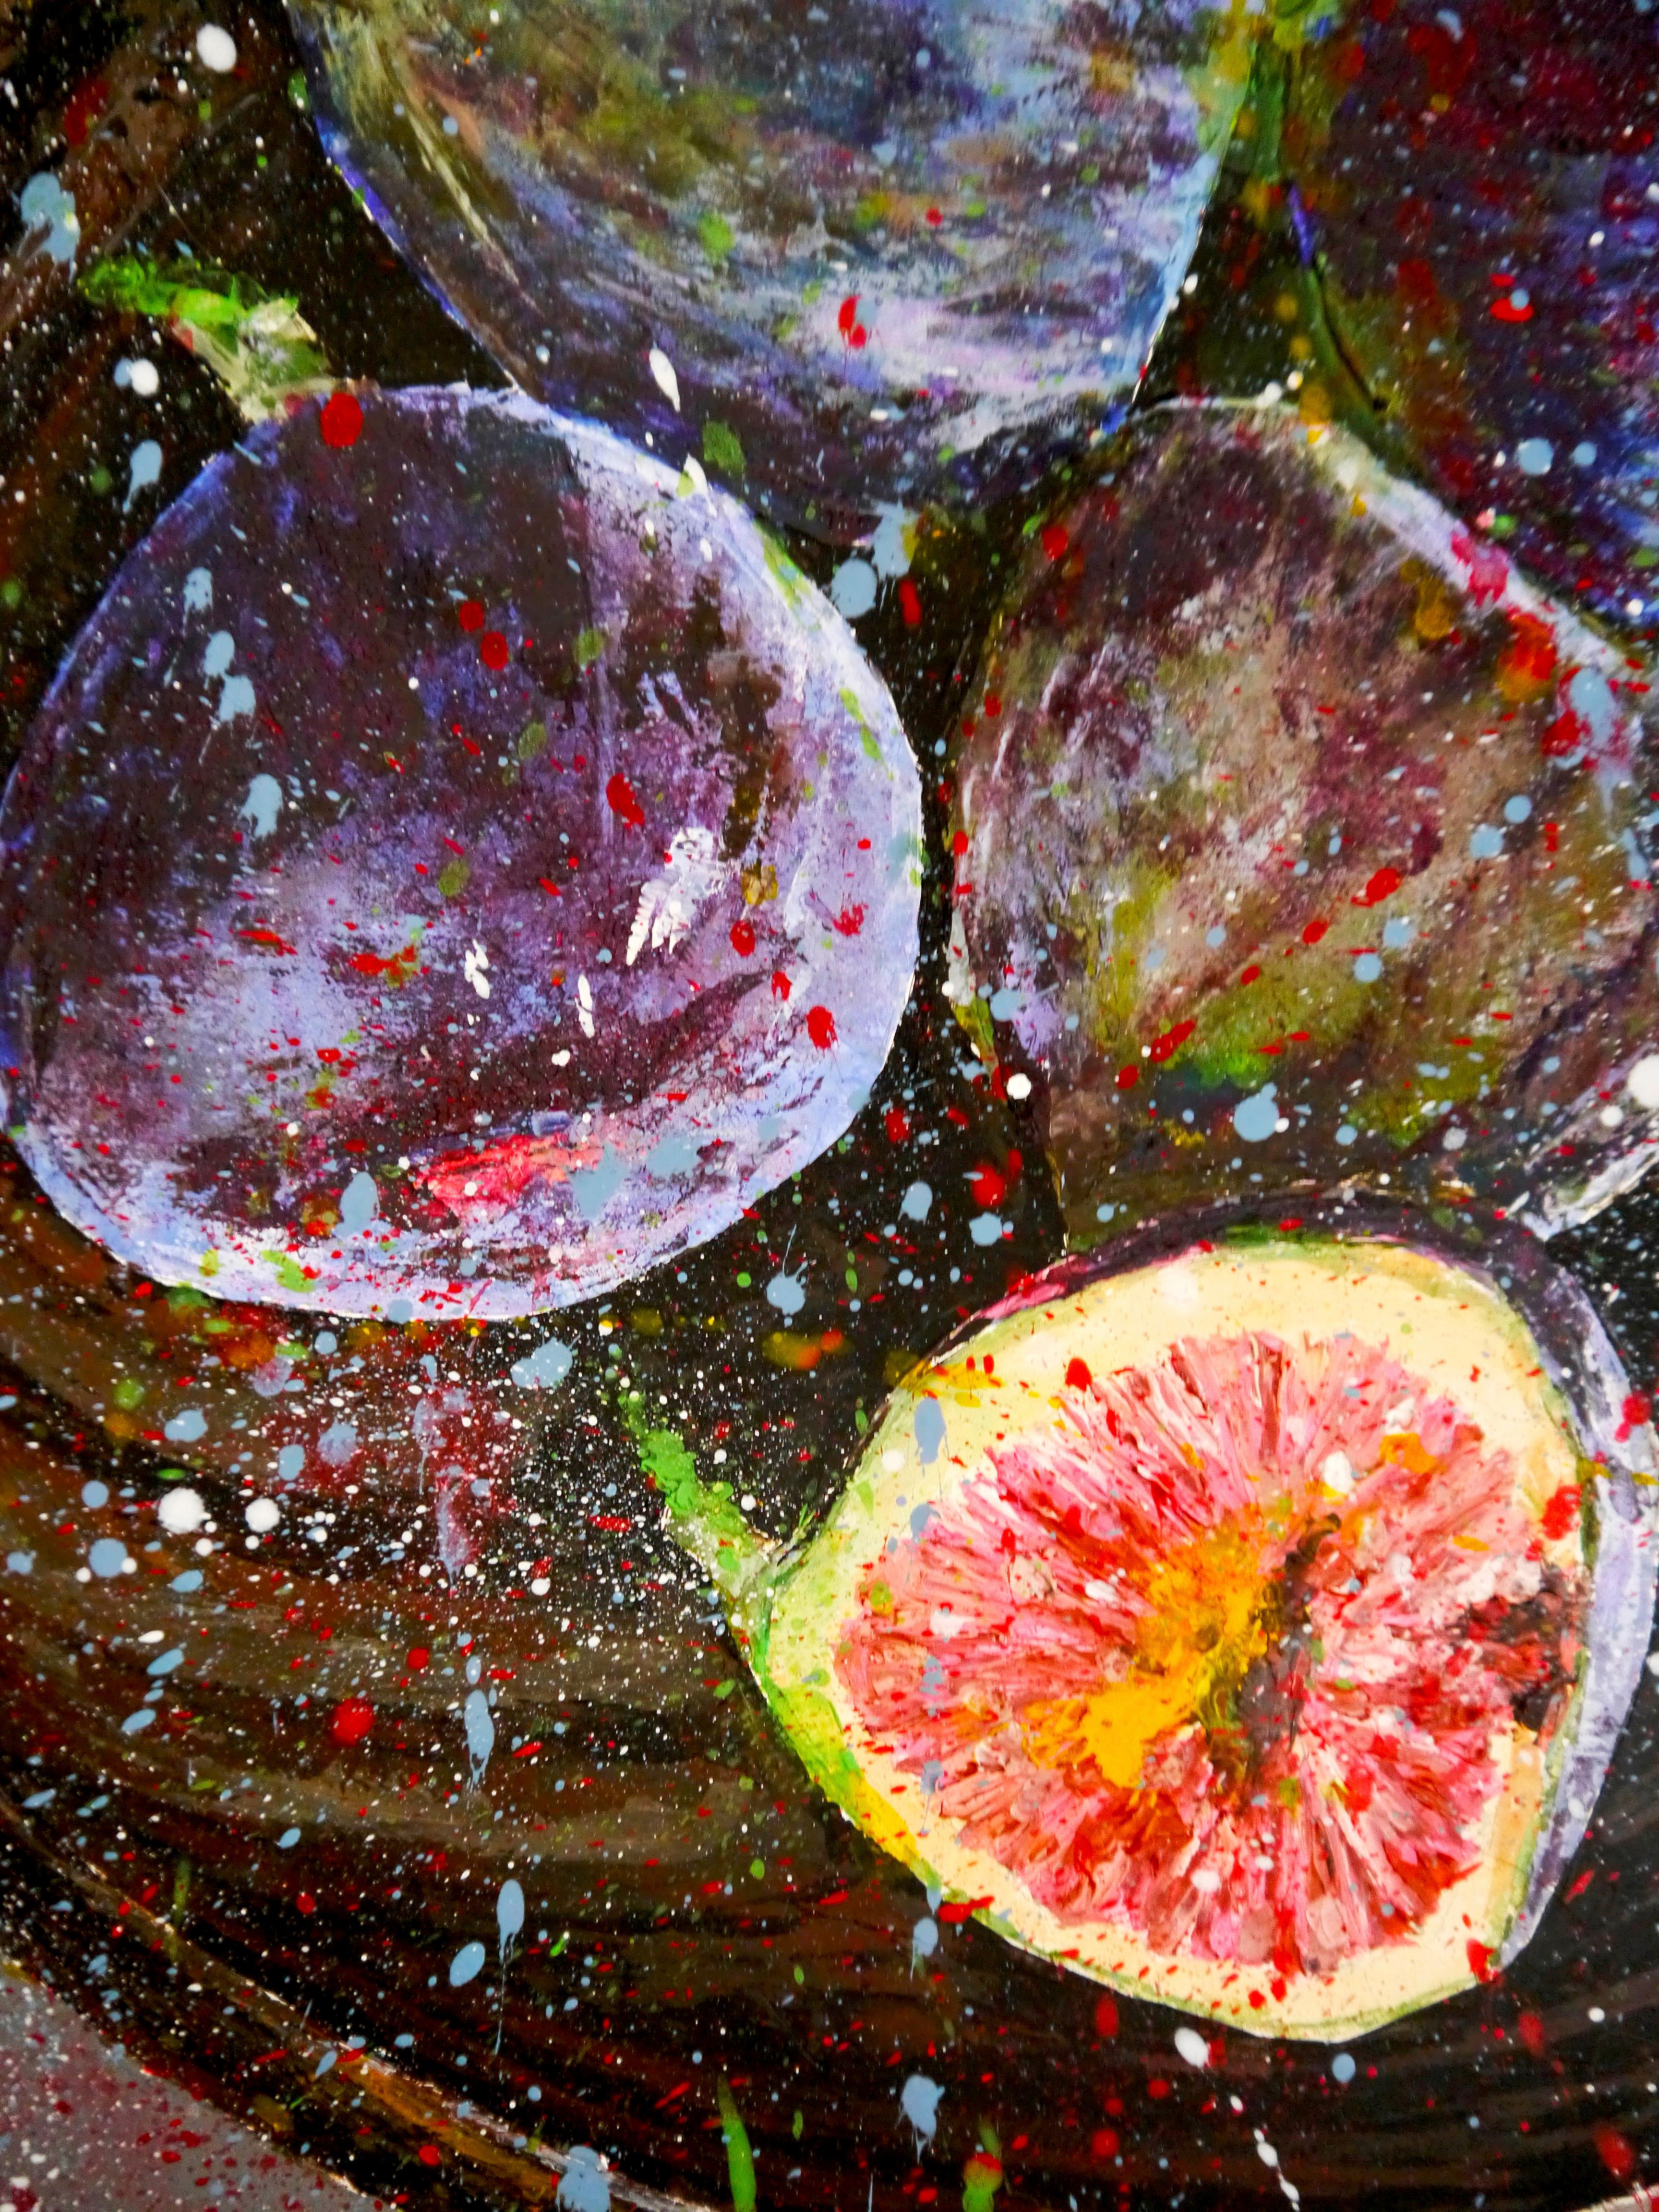 Still life painting - Figs Bowl Starwars

Structural analysis:
Drippings creates movement.

Technique: oil, acrylic, and ink on  cardboard canvas  40 x 40cm (15.75x15.75 inch)

》》R E A D Y -- T O -- H A N G《《


❶ → Original signed work. Certificate